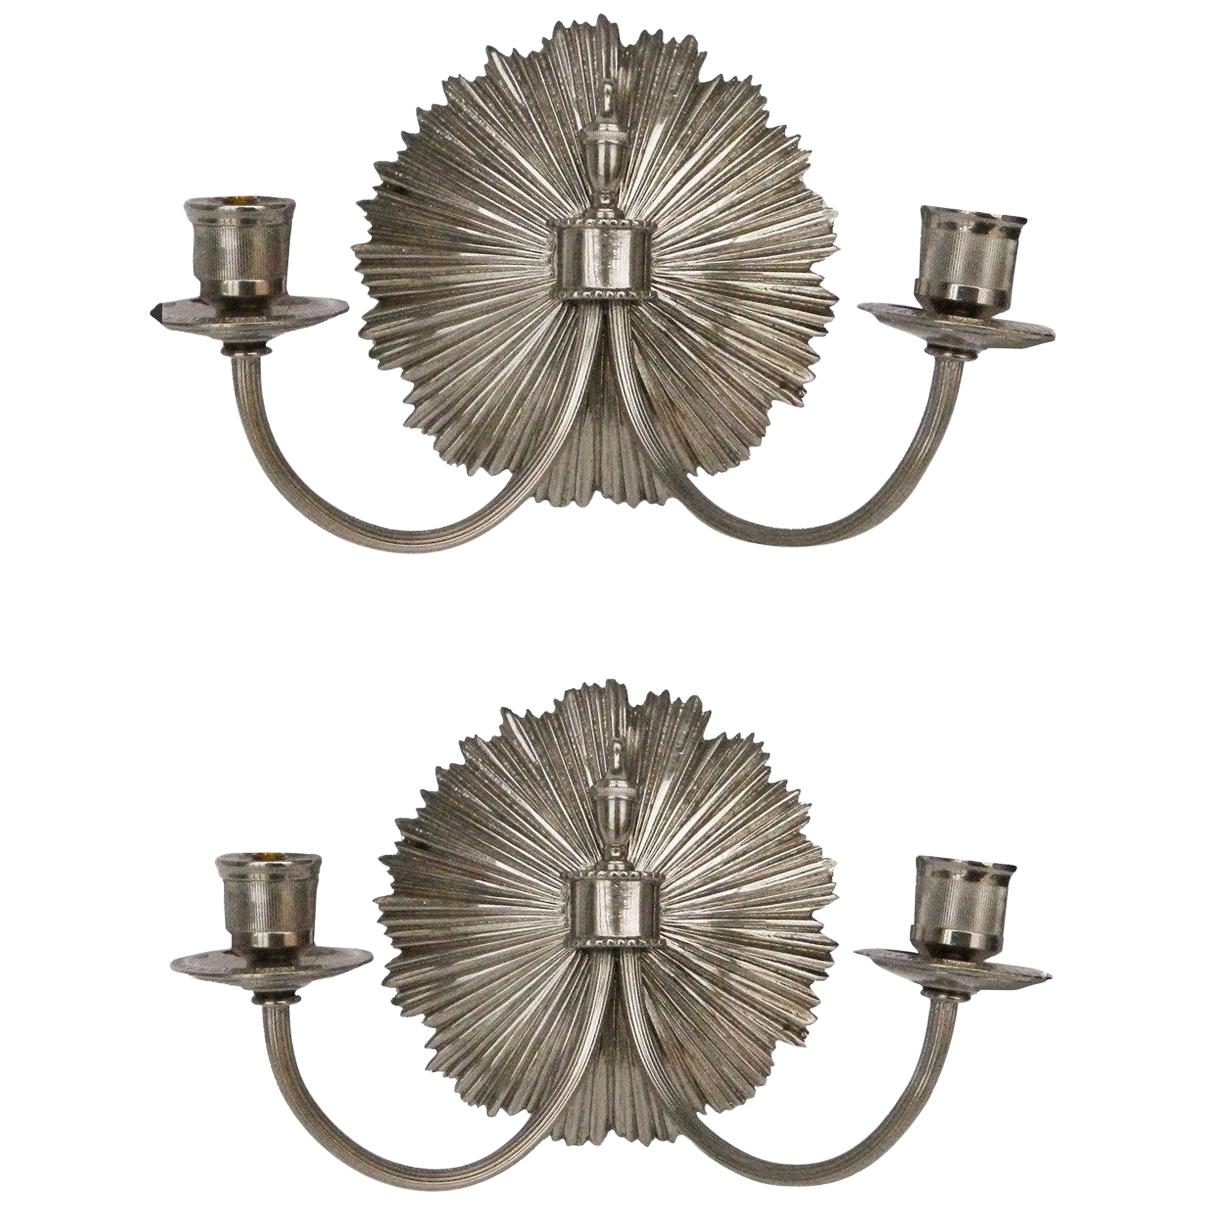 Signed Charles Pair of Silvered Bronze Sconces 2 Pairs Available, Priced by Pair